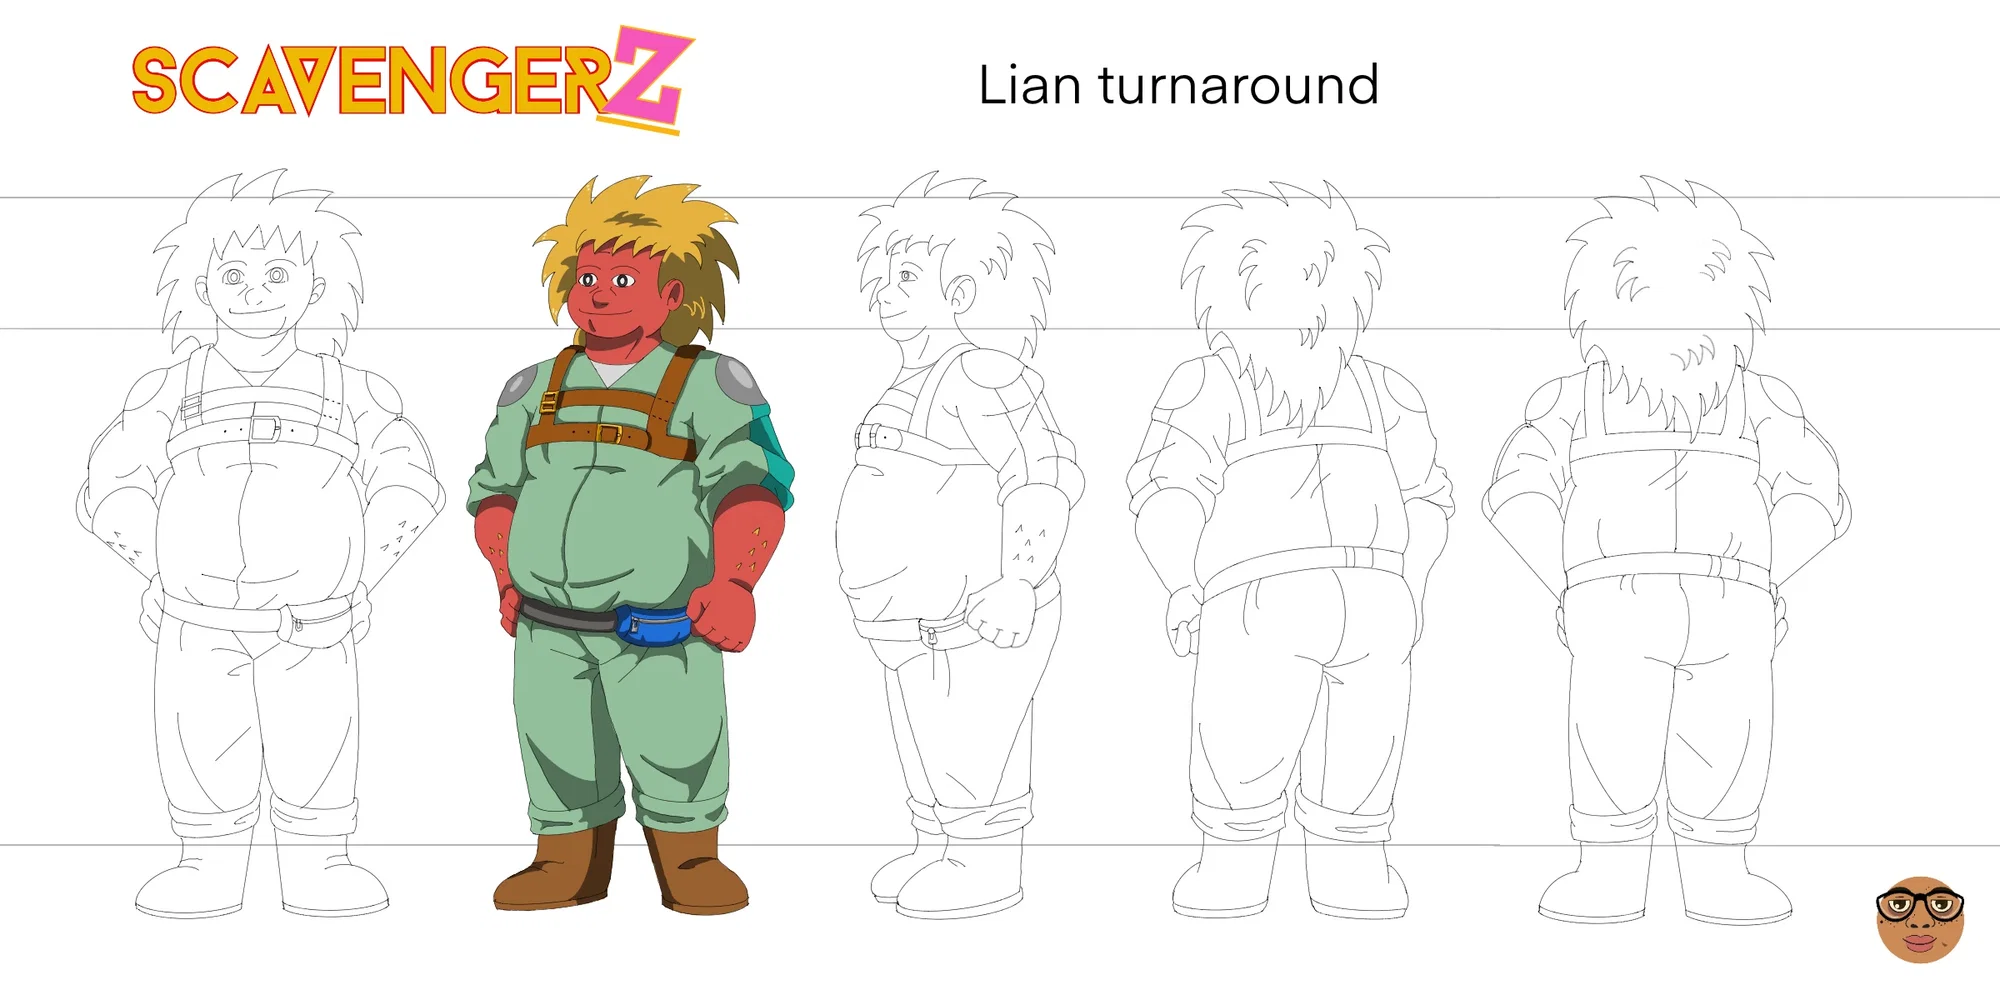 Five point turnaround of a humanoid character named Lian; he’s overweight, wearing coveralls and has medium length, spiky hair